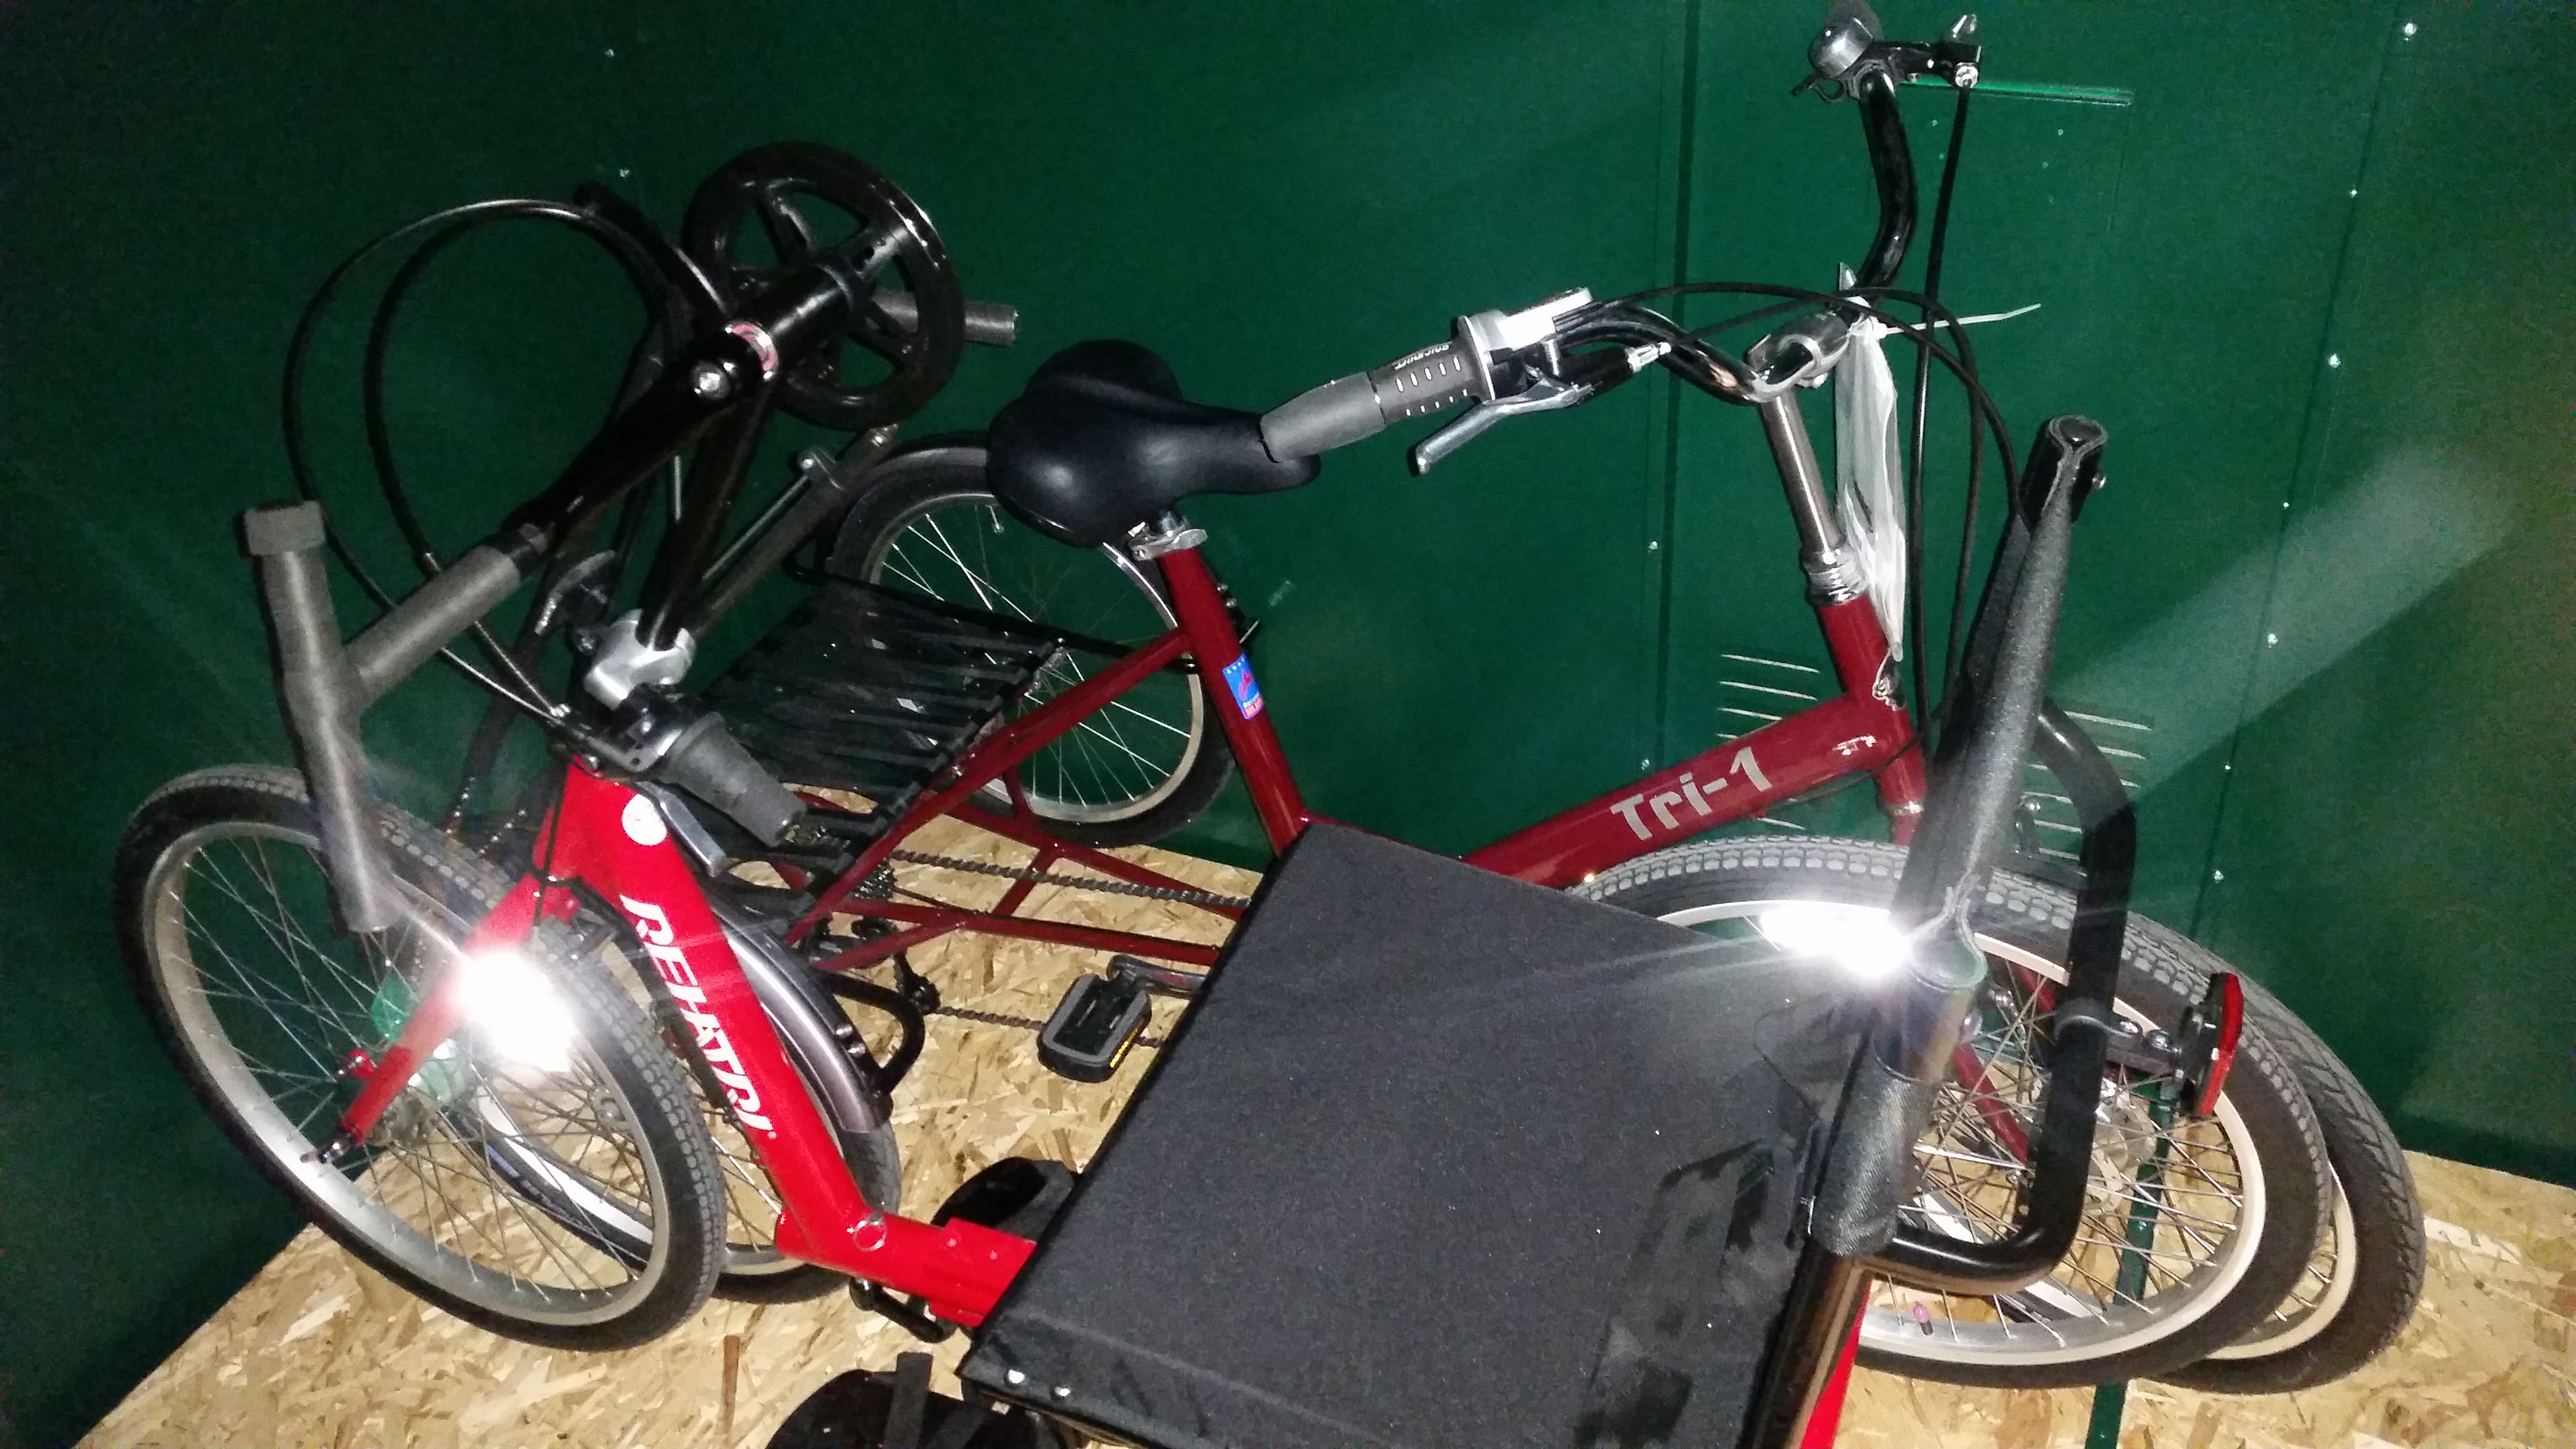 Bikes securely locked in Asgard shed at Wheels for Wellbeing